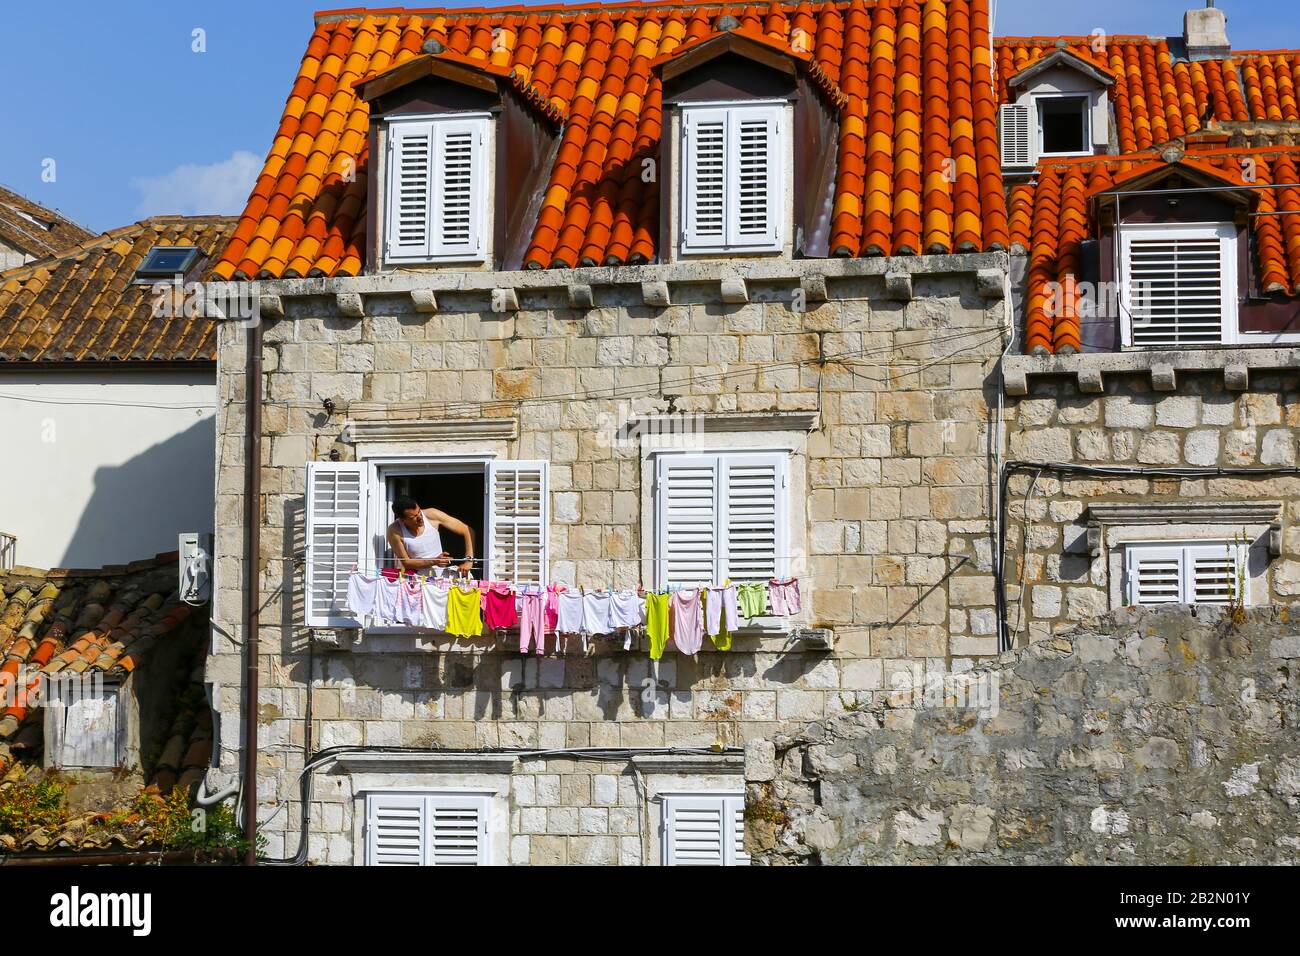 A man looking out of his window with colourful washing hanging from the window in the Old Town, Dubrovnik, Croatia Stock Photo